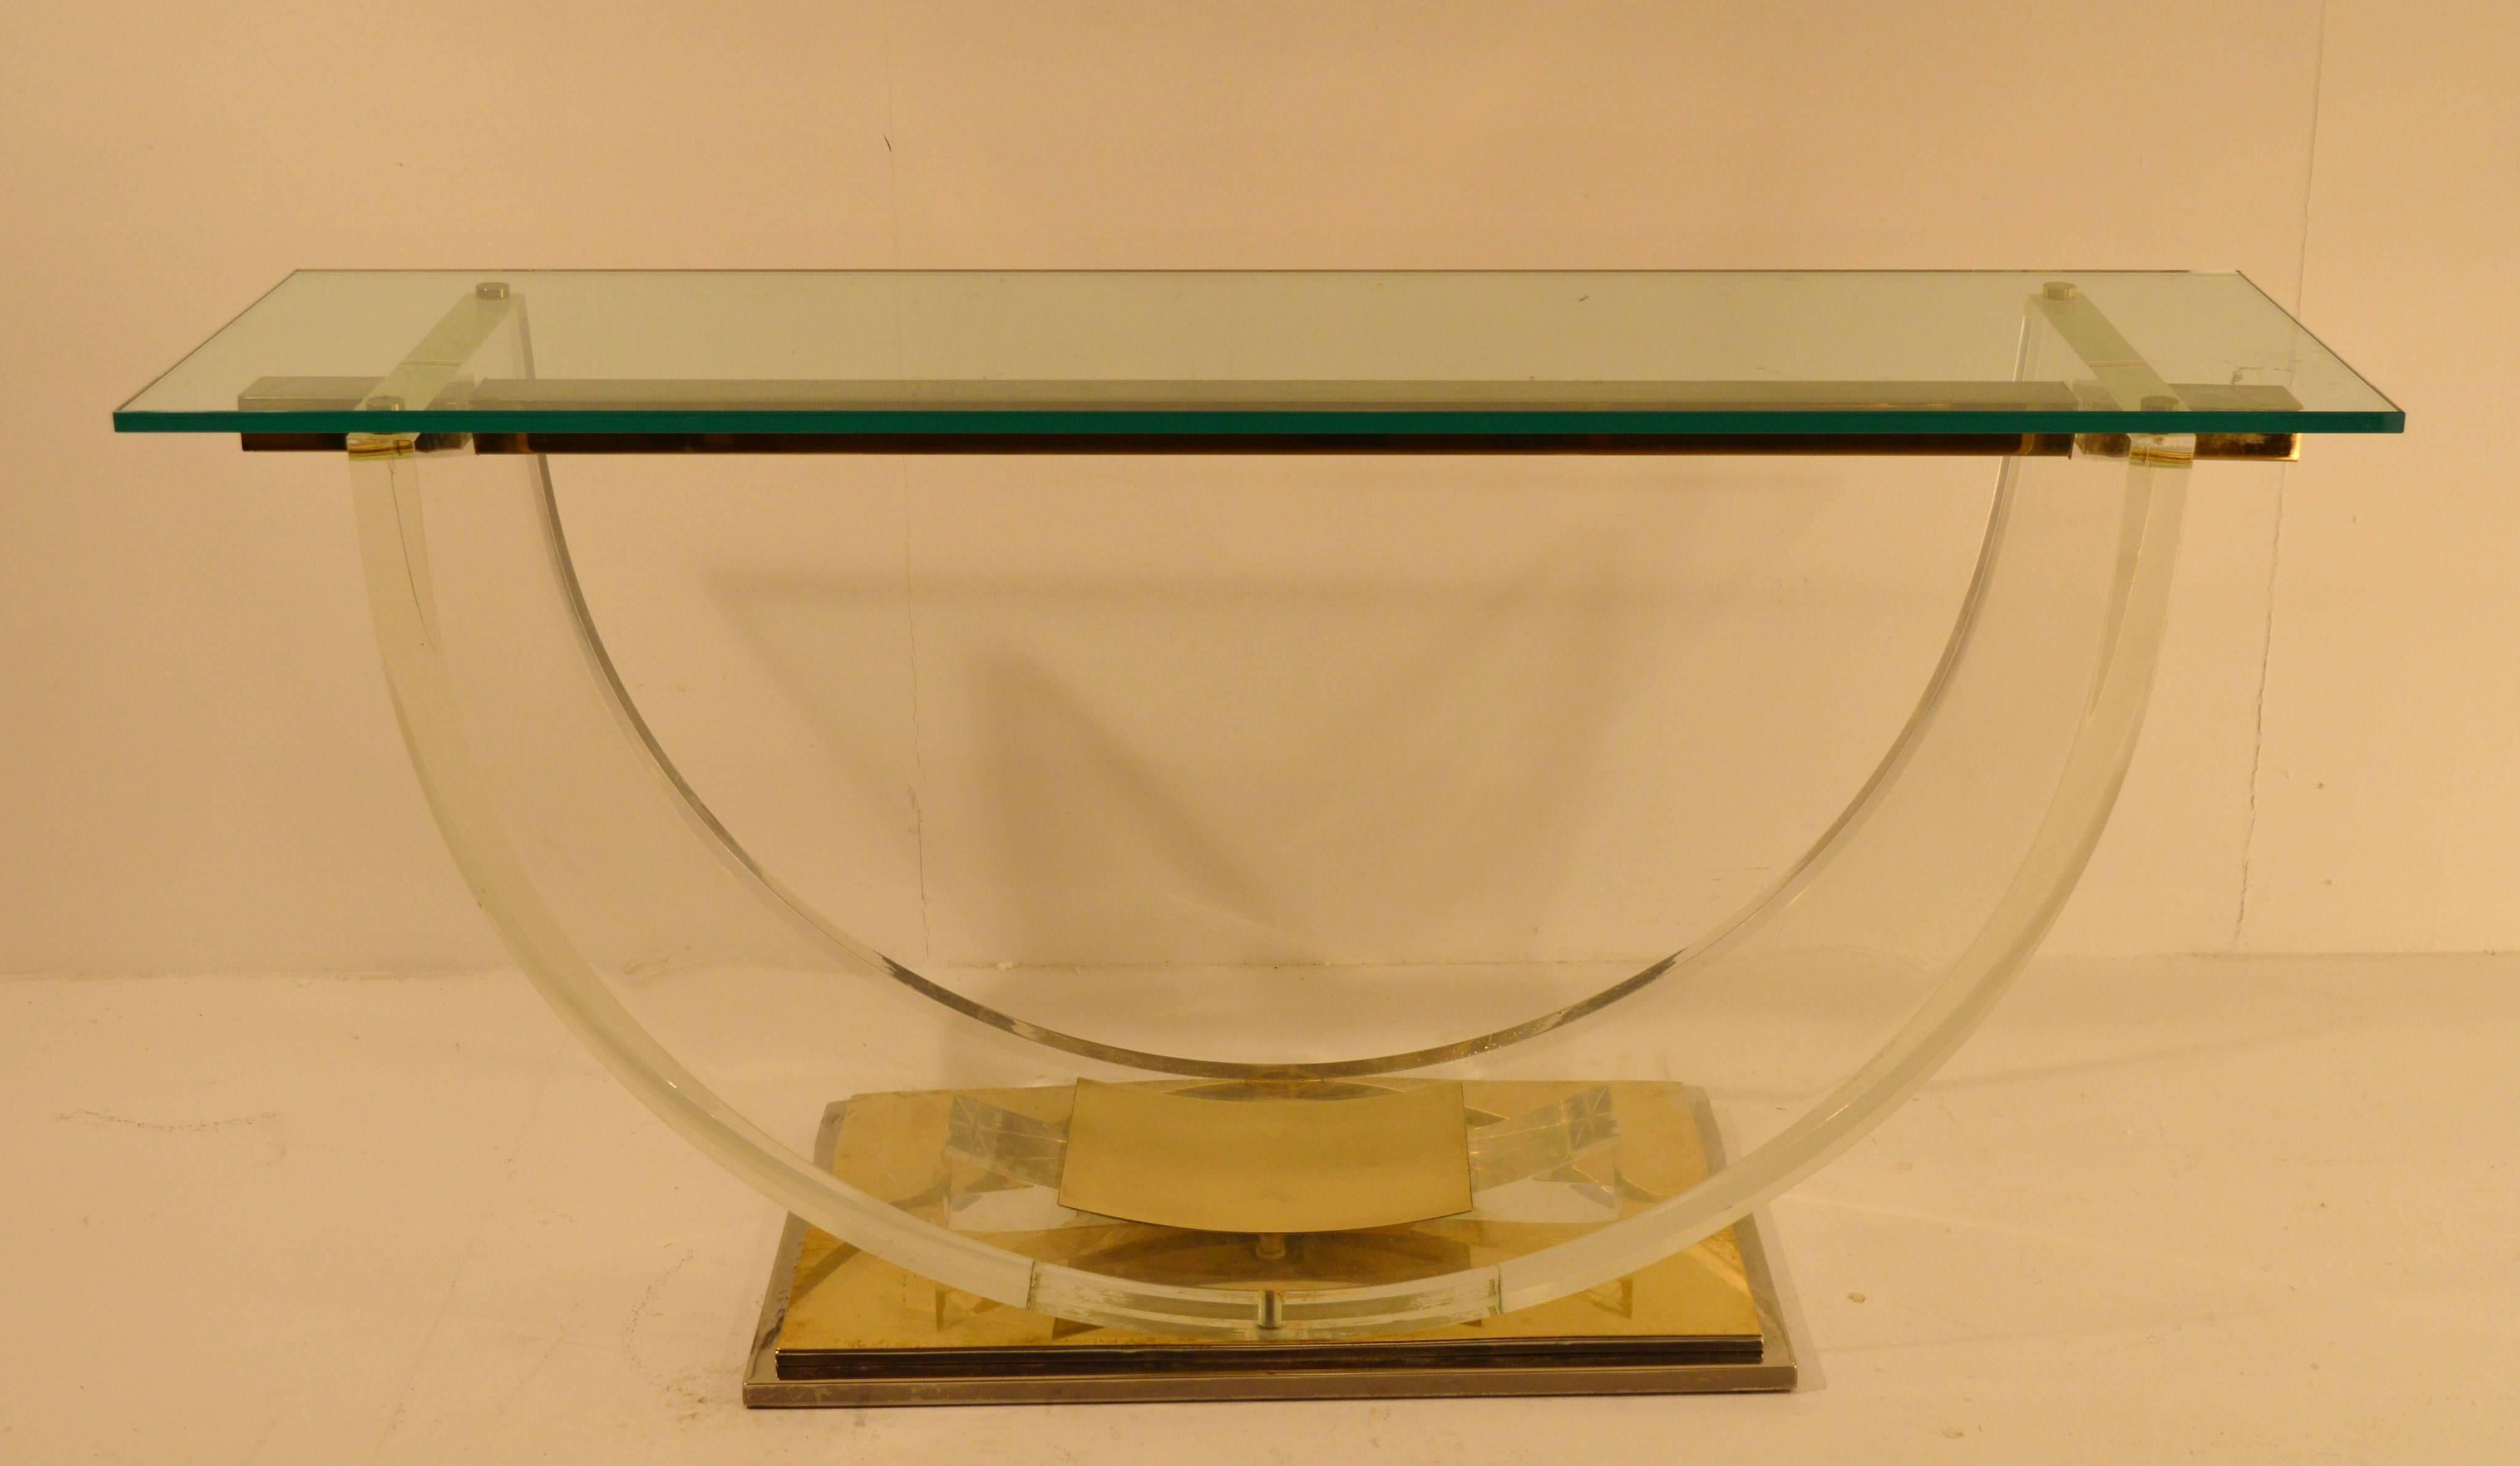 Exceptional and high quality console created in the late 1970s.
The base is made of chrome-plated steel in combination with brass elements, while the top is in 15 mm glass.